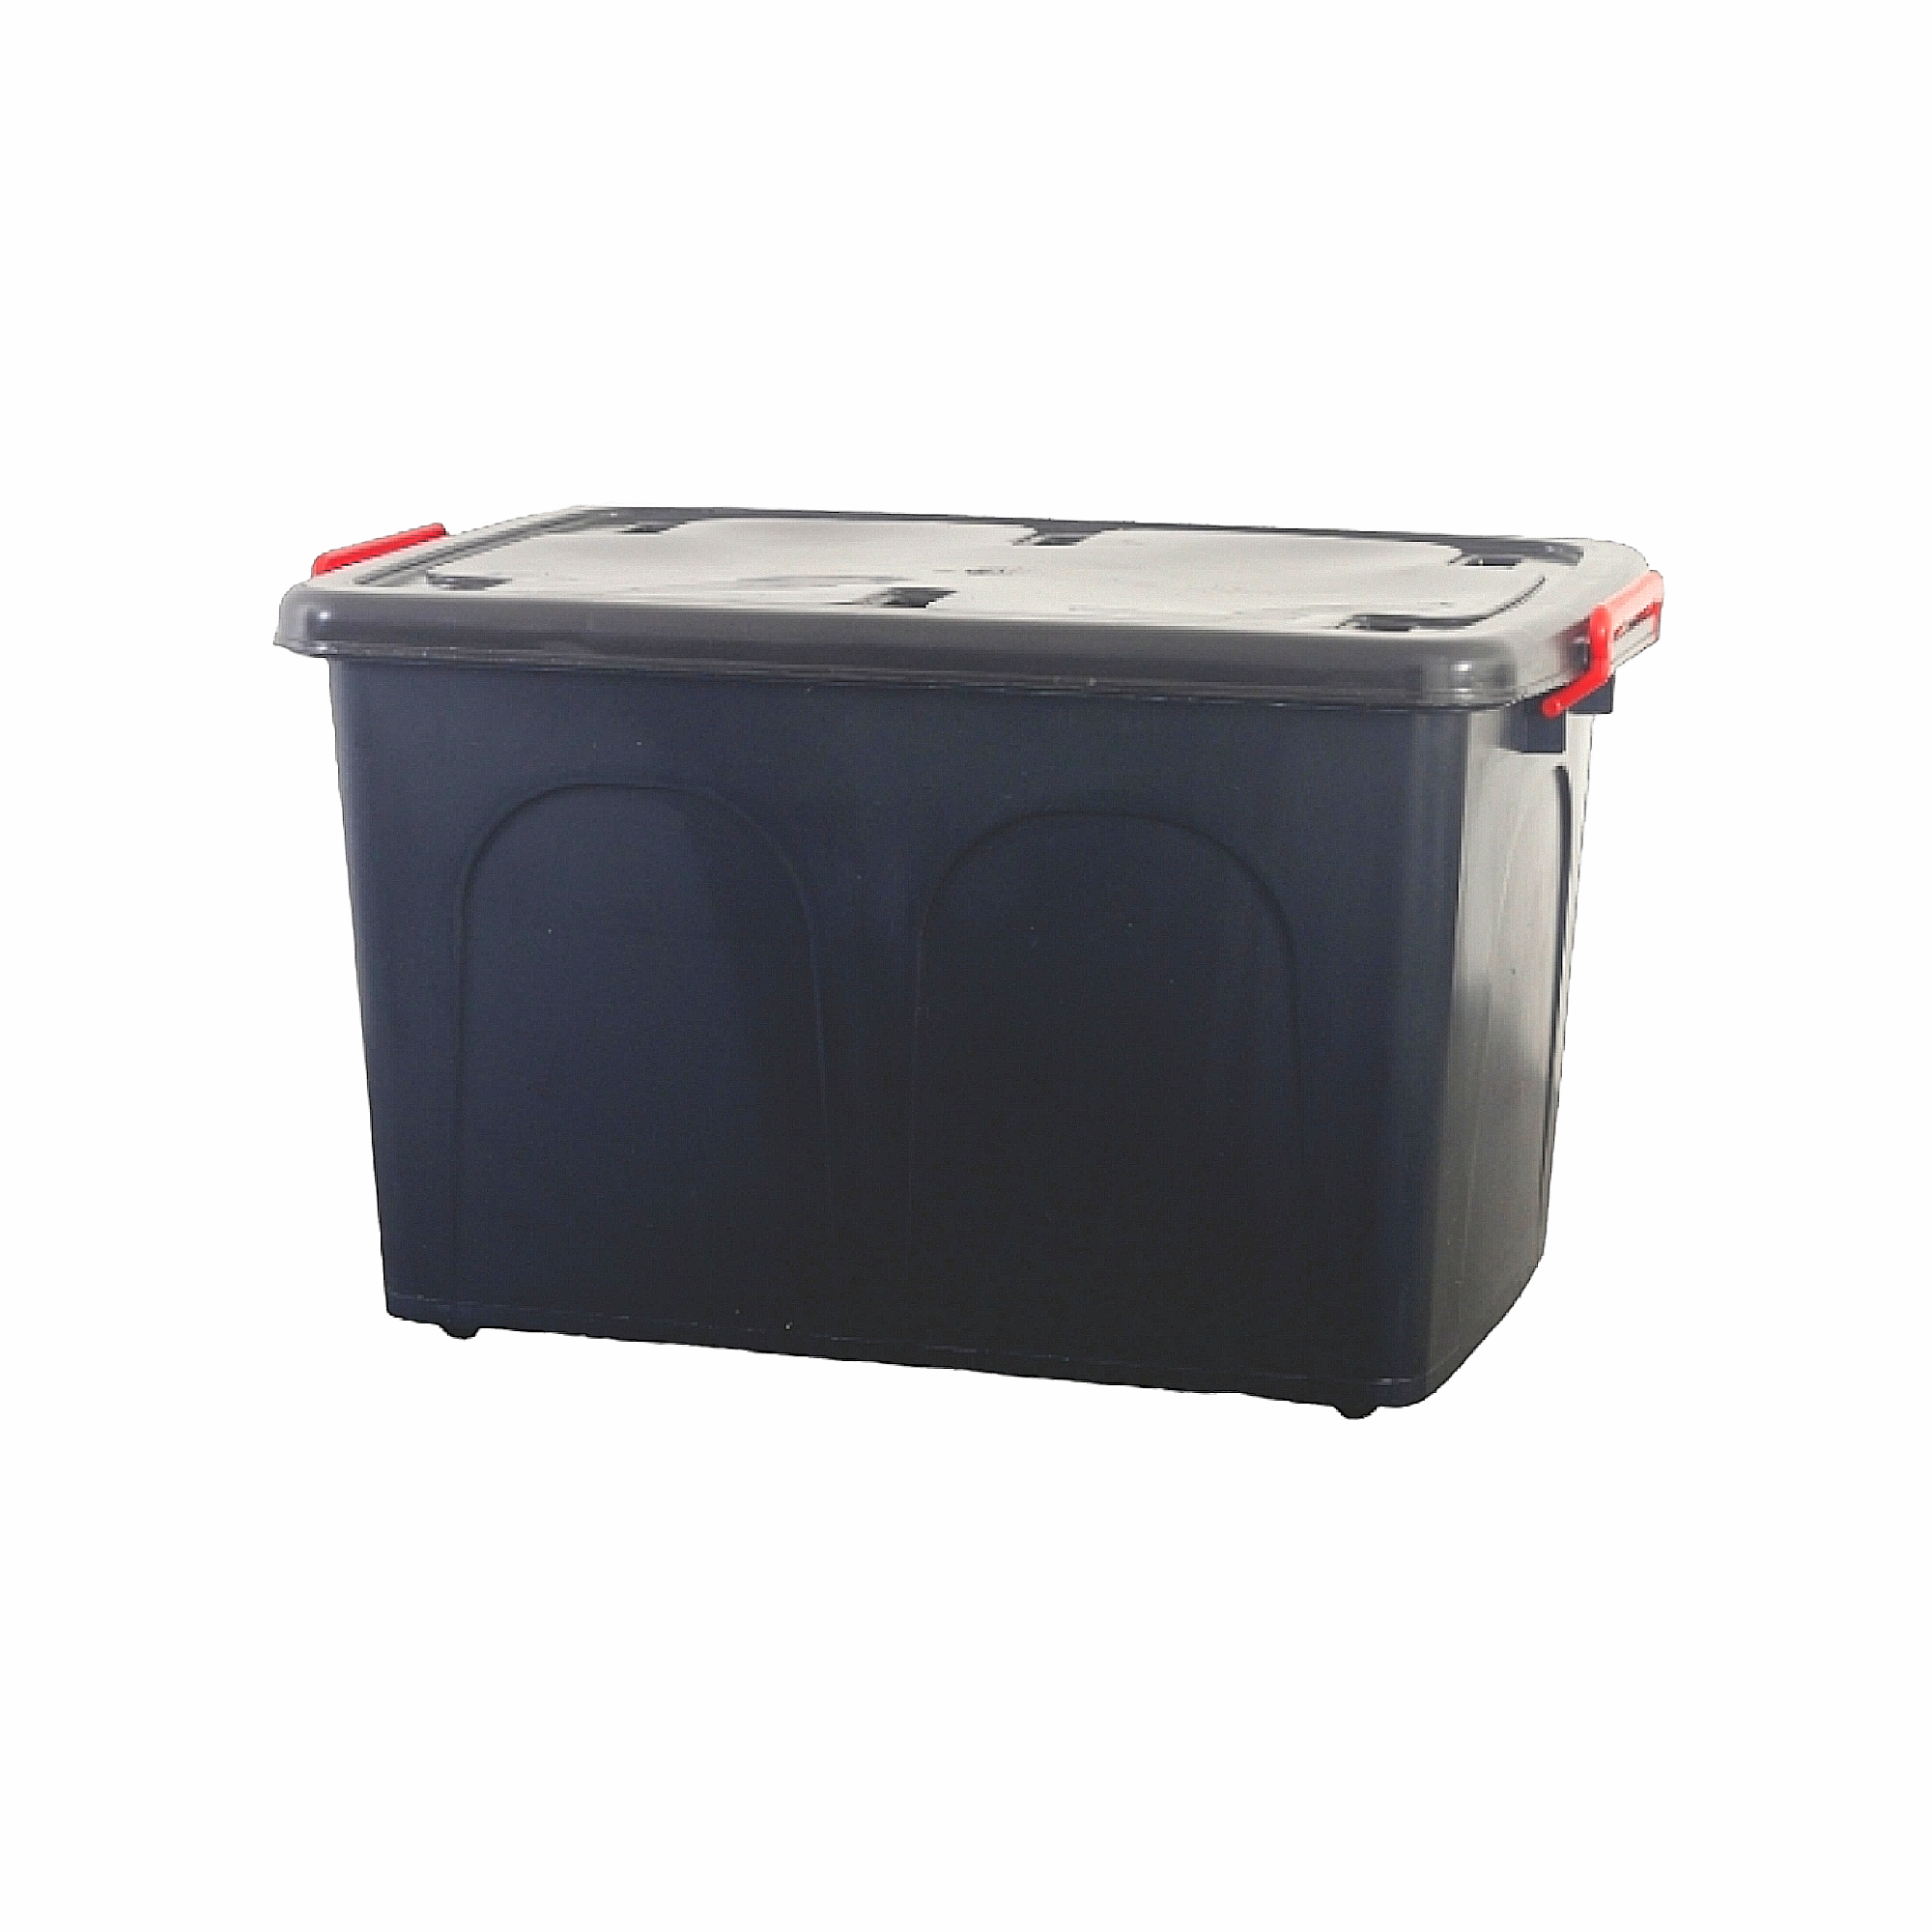 85L Storage Box Plastic Utility Container Black with Wheels